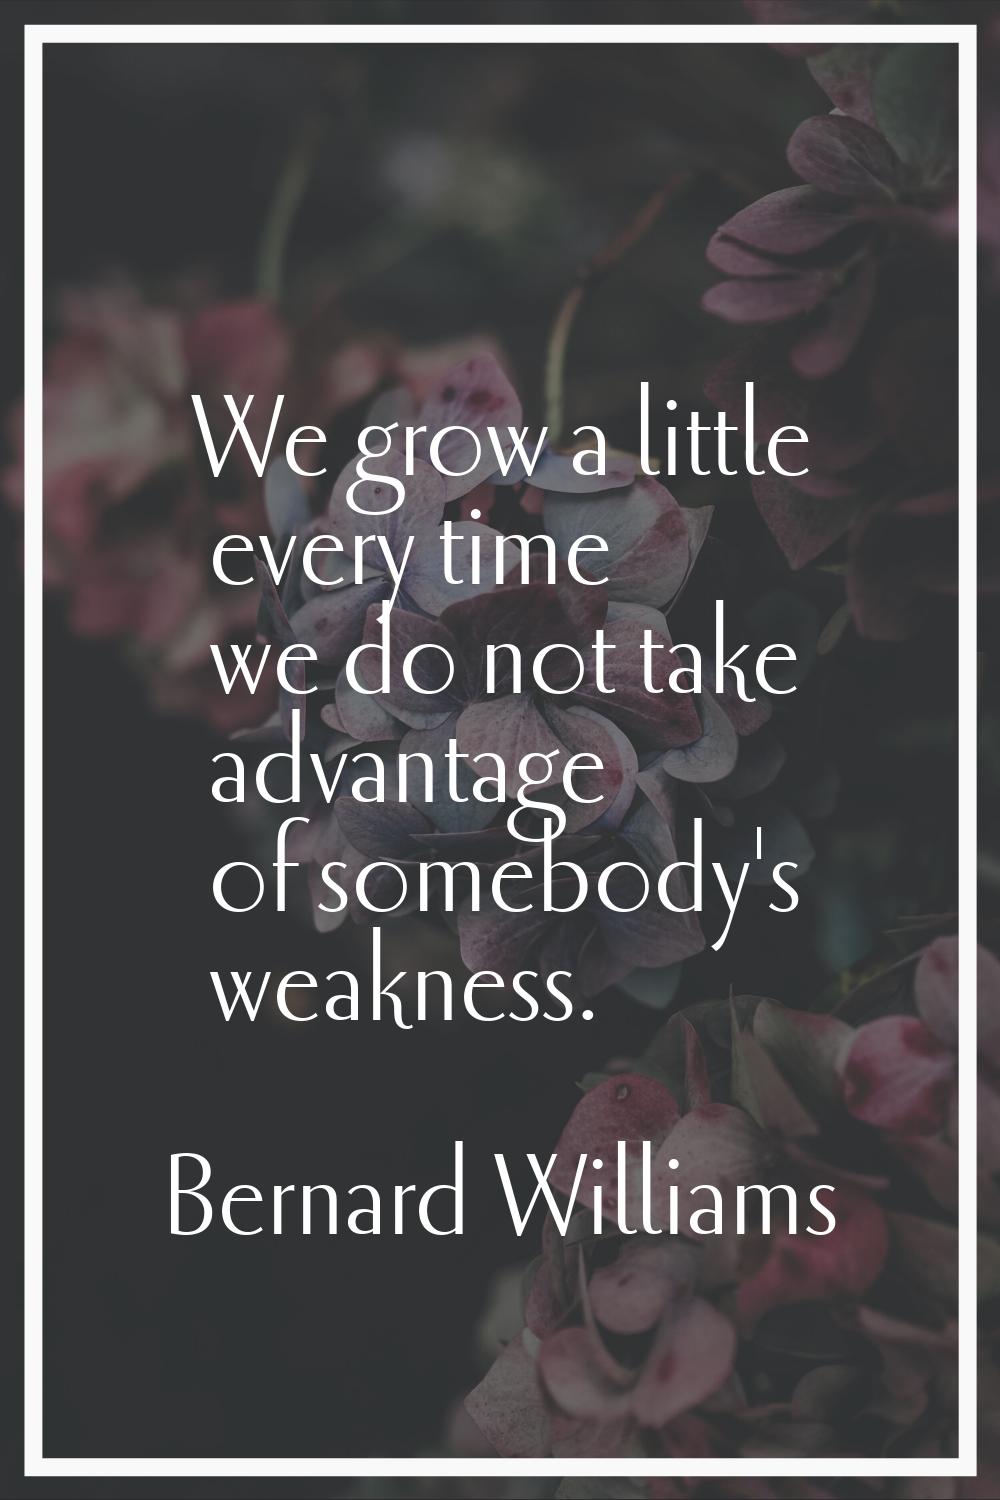 We grow a little every time we do not take advantage of somebody's weakness.